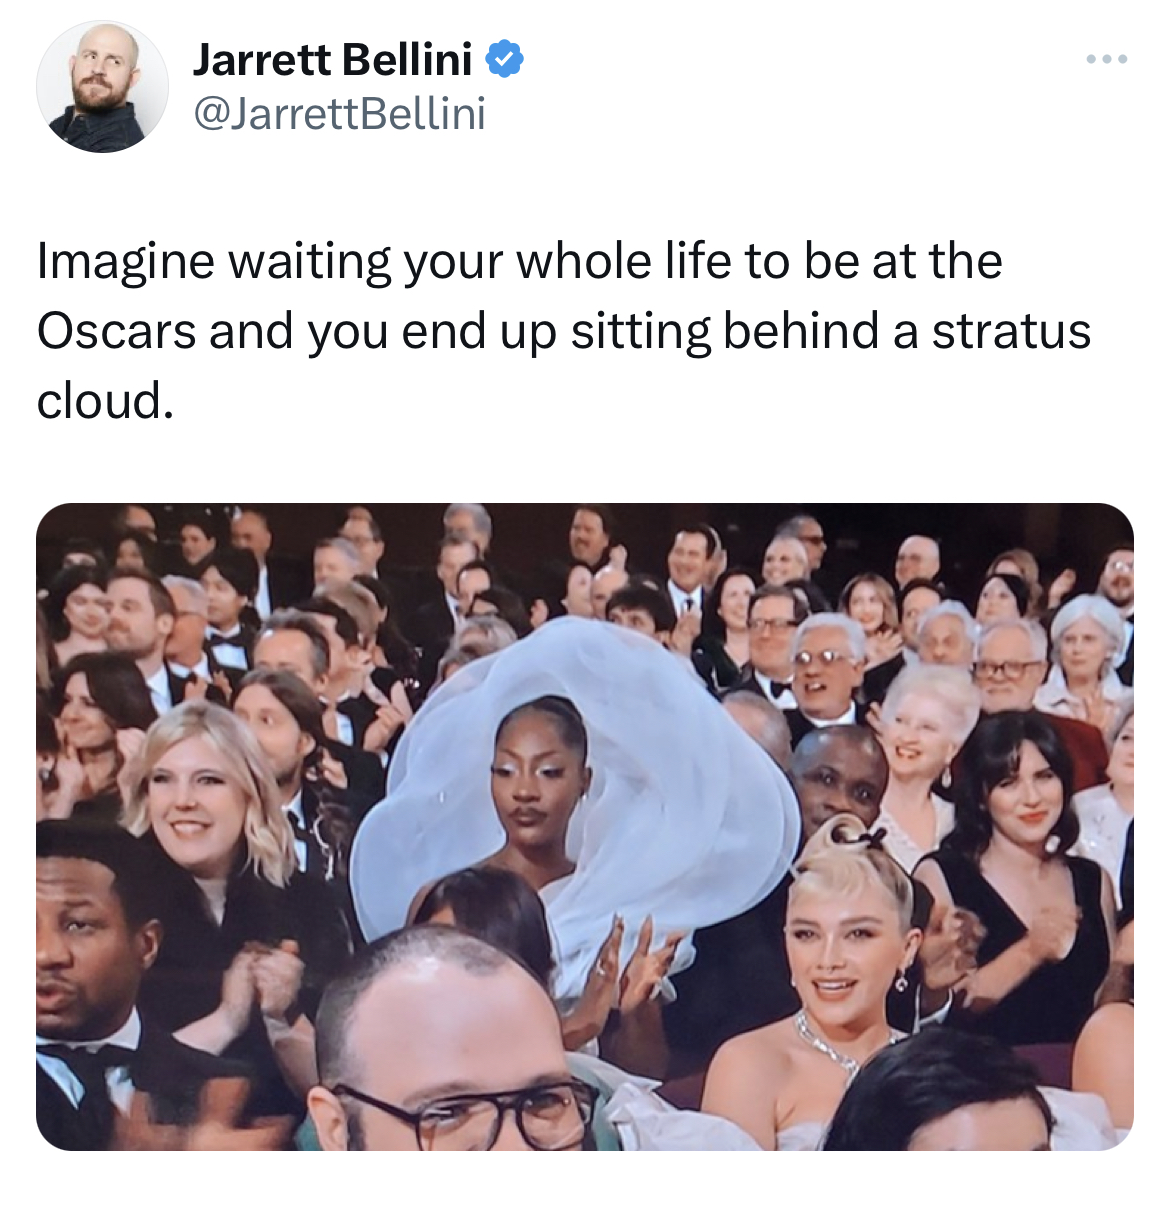 savage tweets - presentation - Jarrett Bellini Imagine waiting your whole life to be at the Oscars and you end up sitting behind a stratus cloud.